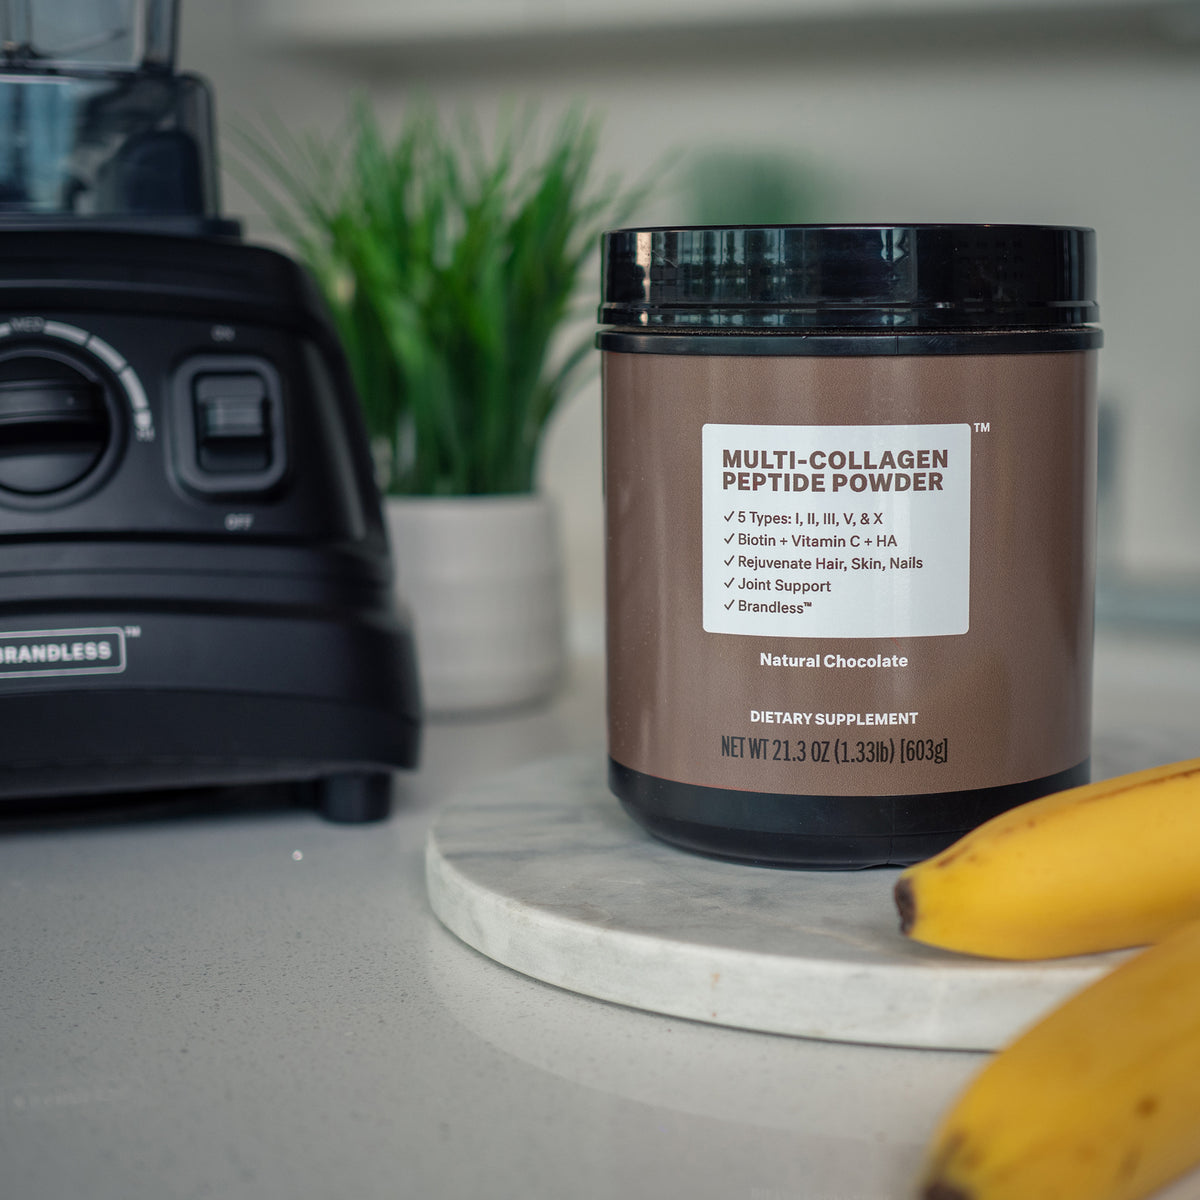 Lifestyle photo, tub of multi-collagen peptide powder sits on a kitchen counter next to a brandless Pro-Blender and some ripe bananas.